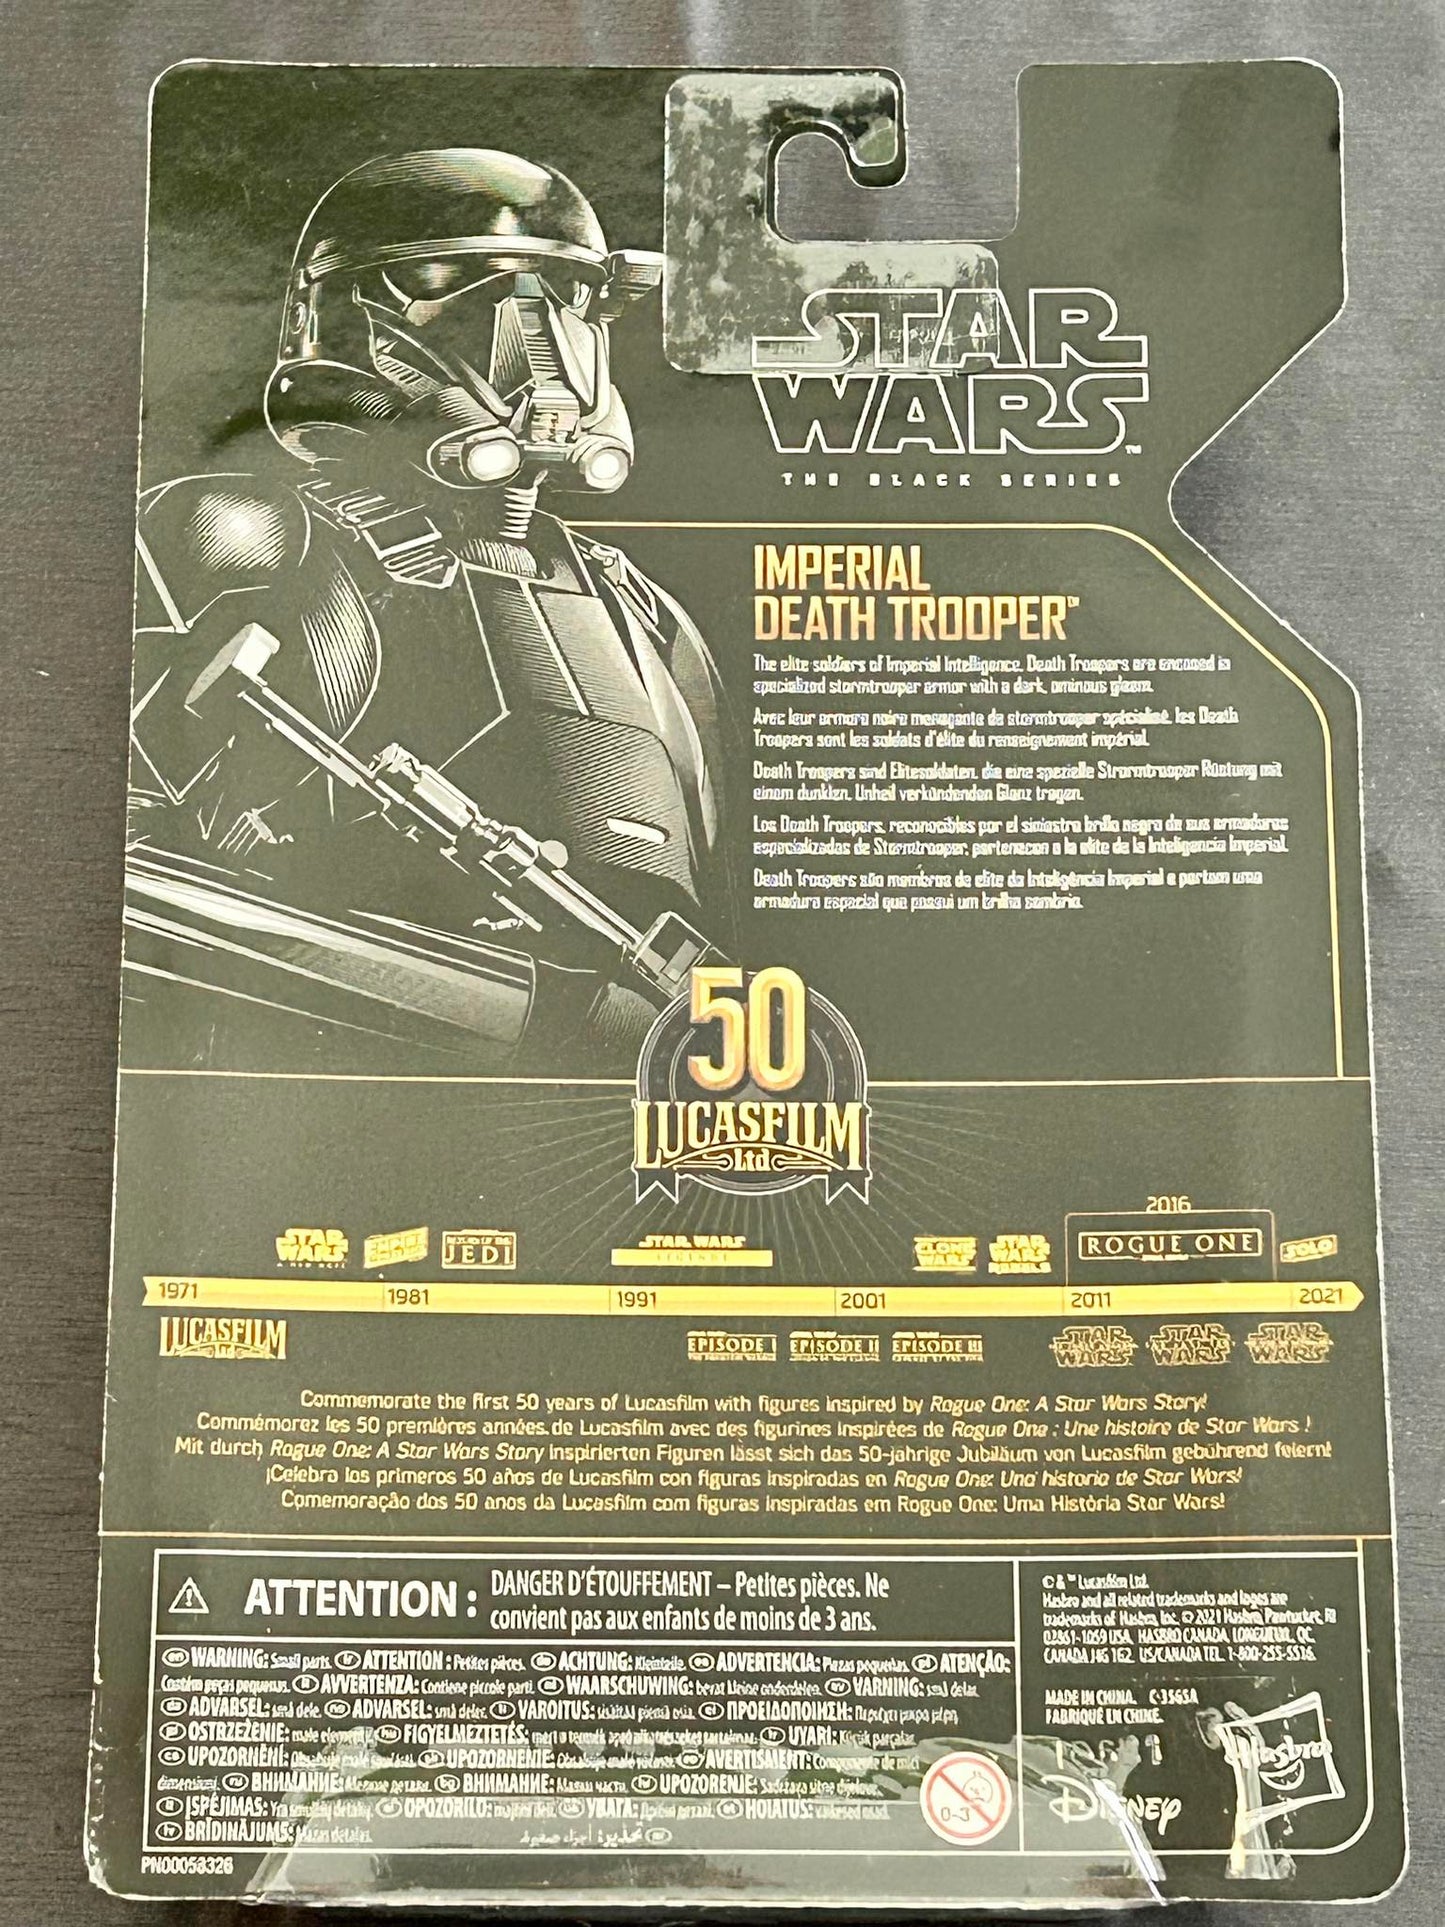 Star Wars The Black Series Archive - Imperial Death Trooper 15cm Action Figure